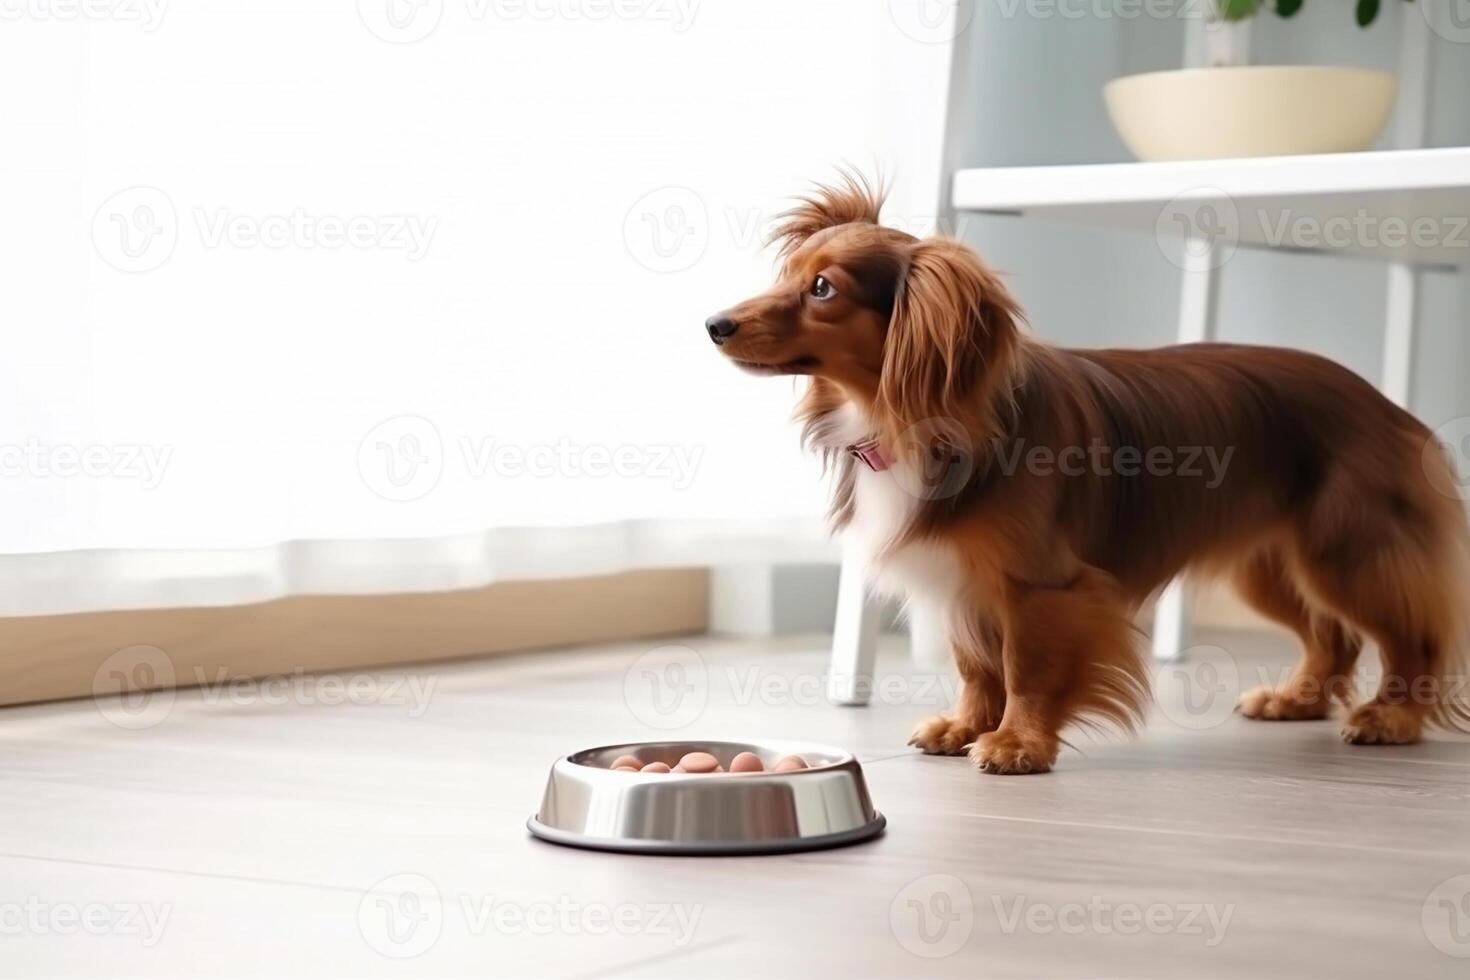 Cute Dachshund Dog standing next to the food bowl at home kitchen, photo